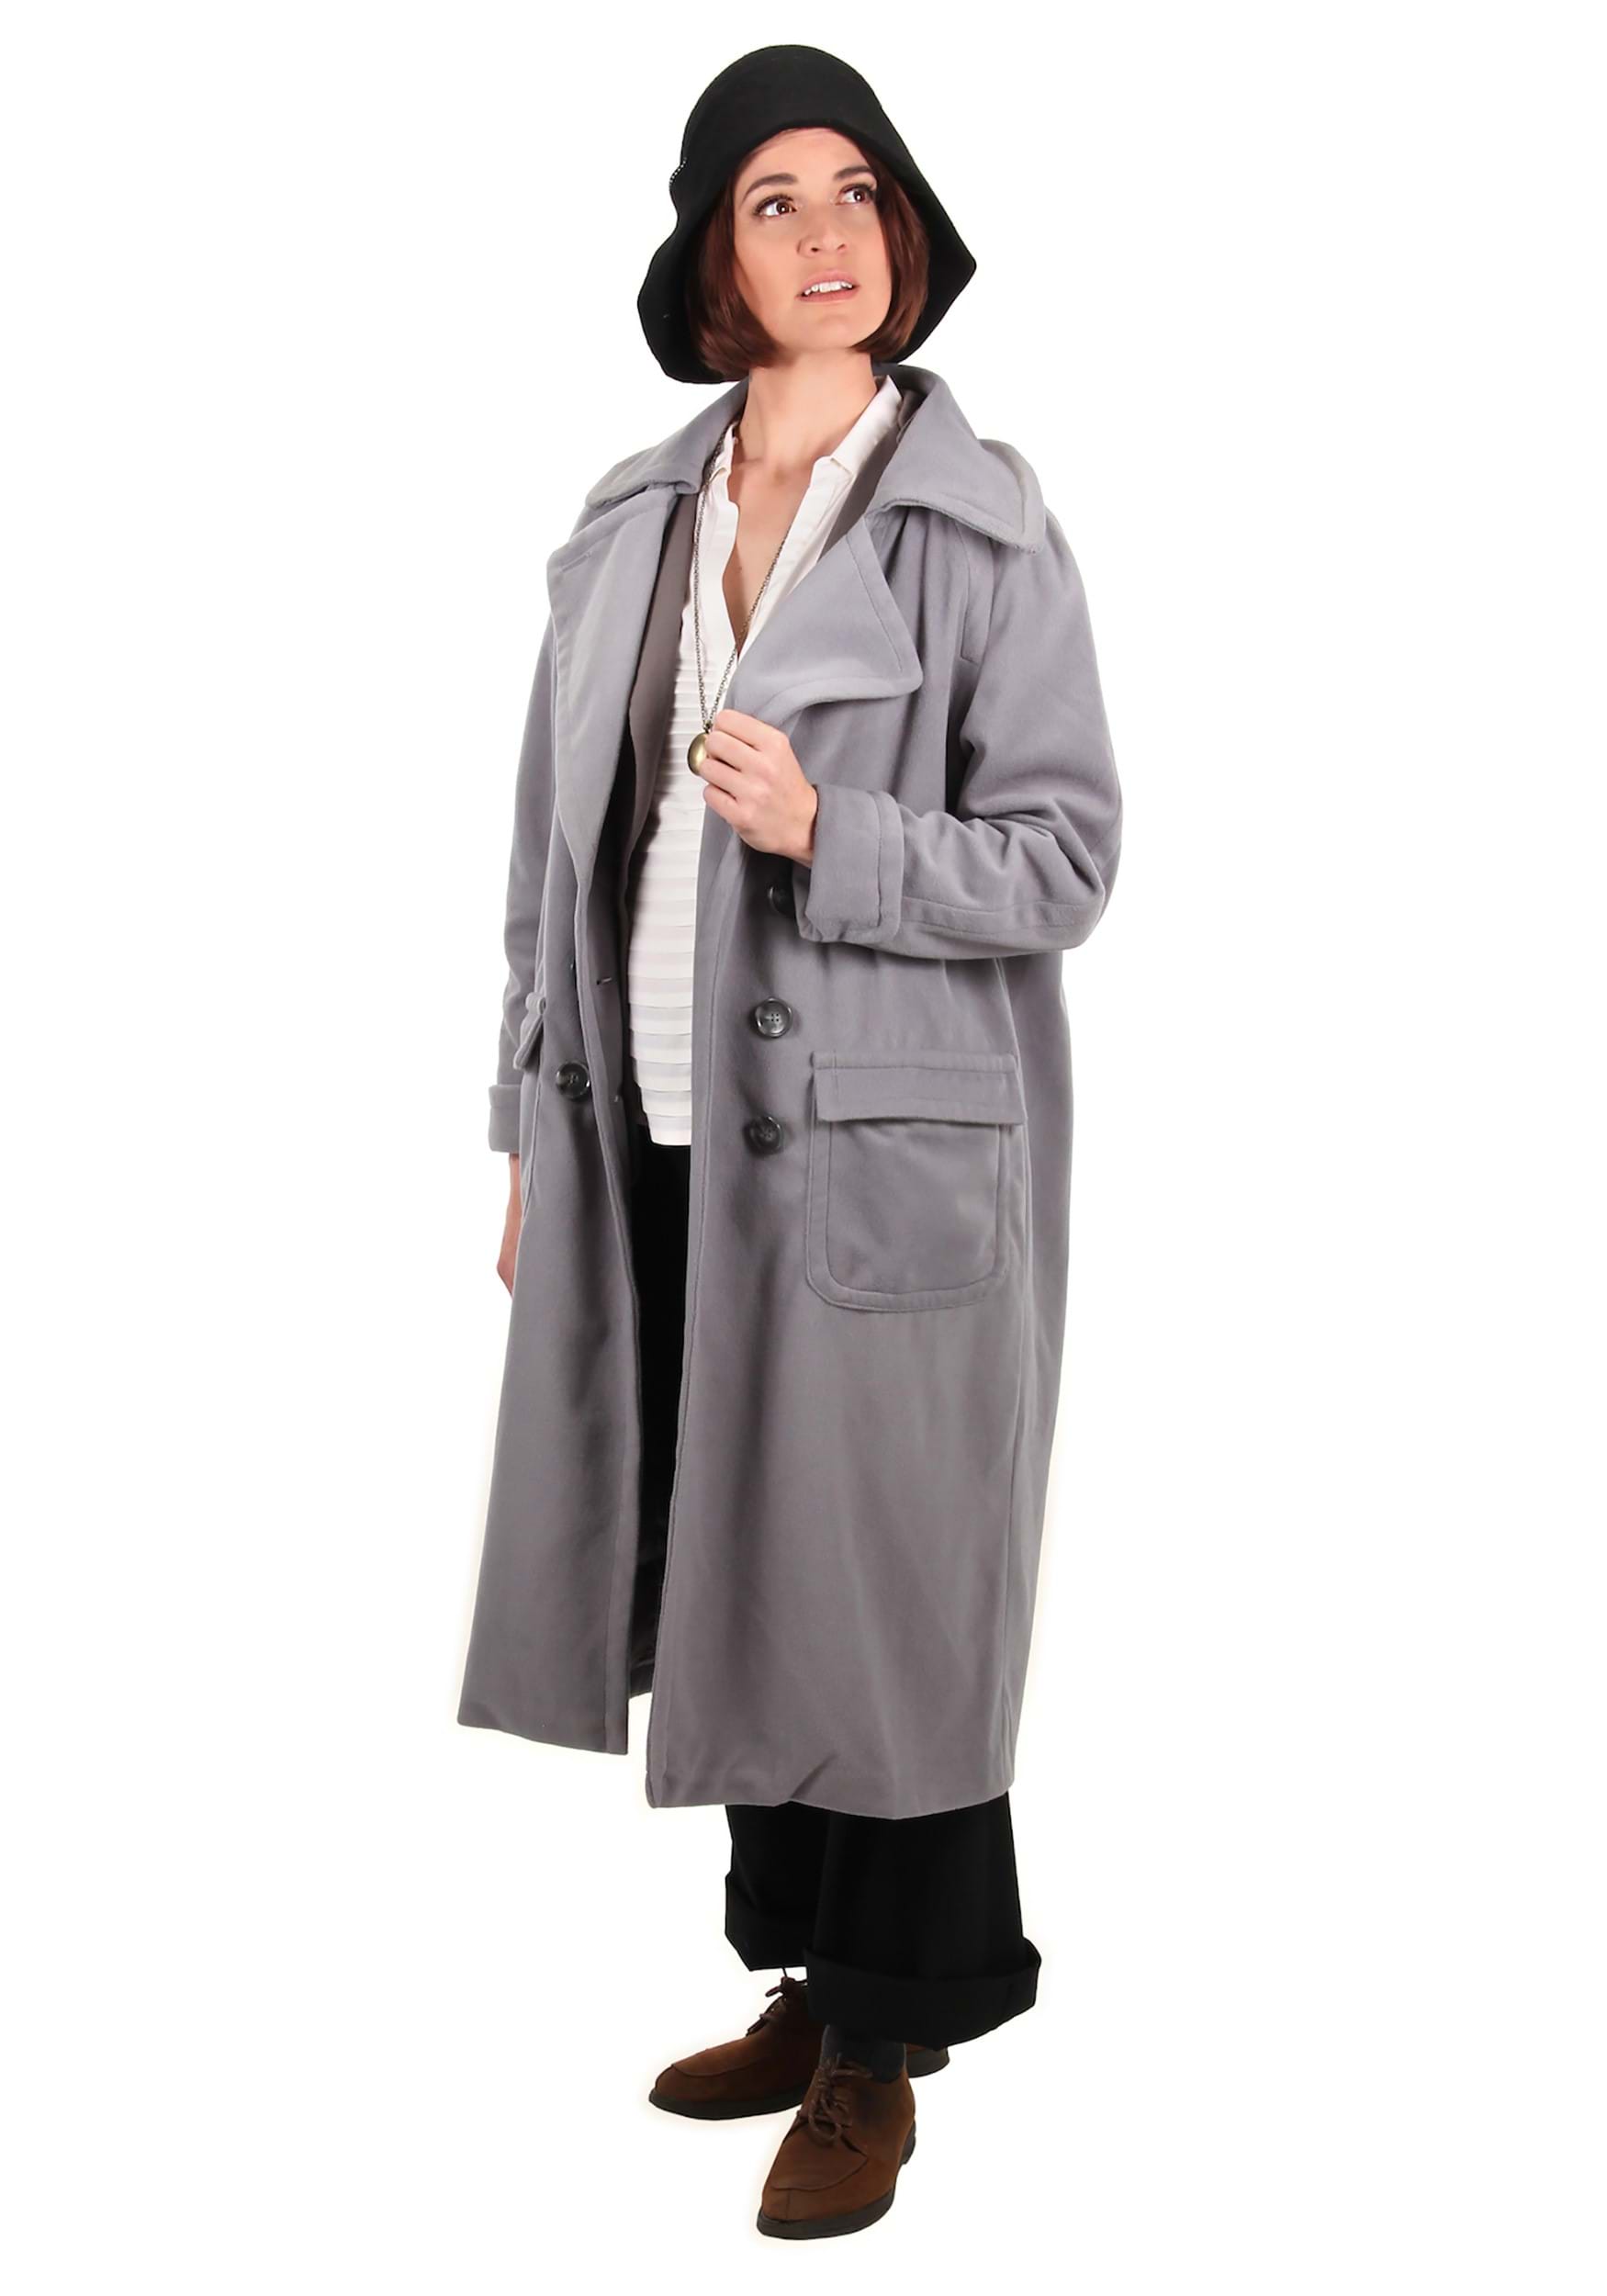 Tina Goldstein Coat Fancy Dress Costume From Fantastic Beasts And Where To Find Them